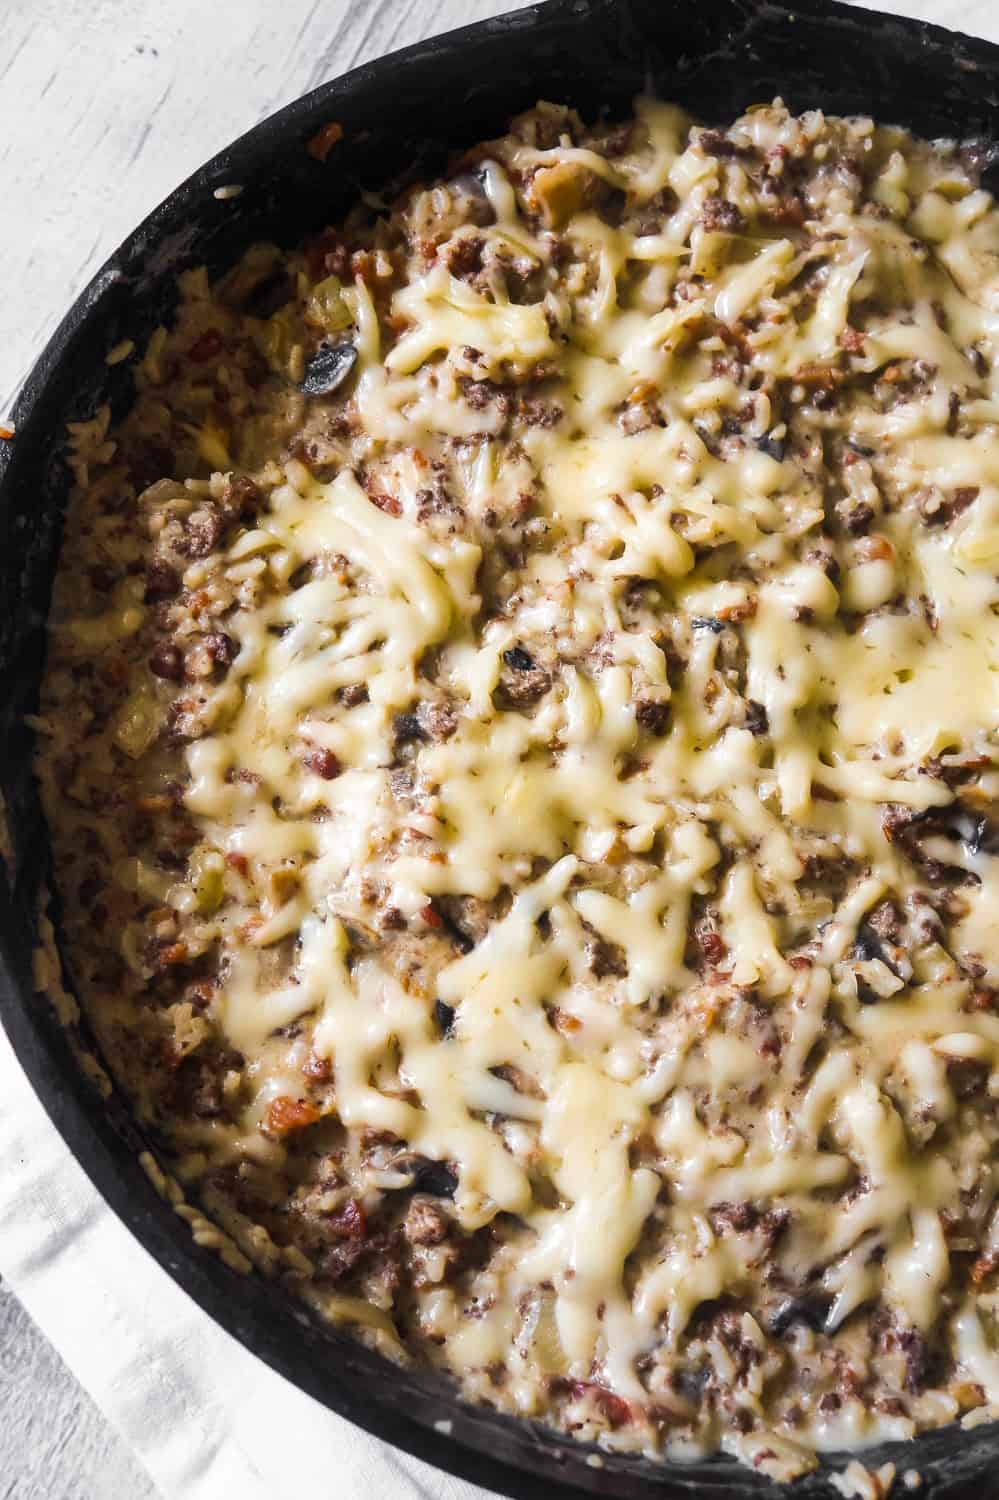 Bacon Mushroom Swiss Ground Beef and Rice is an easy stove top dinner recipe that can be on the table in under 30 minutes. This ground beef dish is loaded with sliced mushrooms, real bacon bits and Swiss cheese.